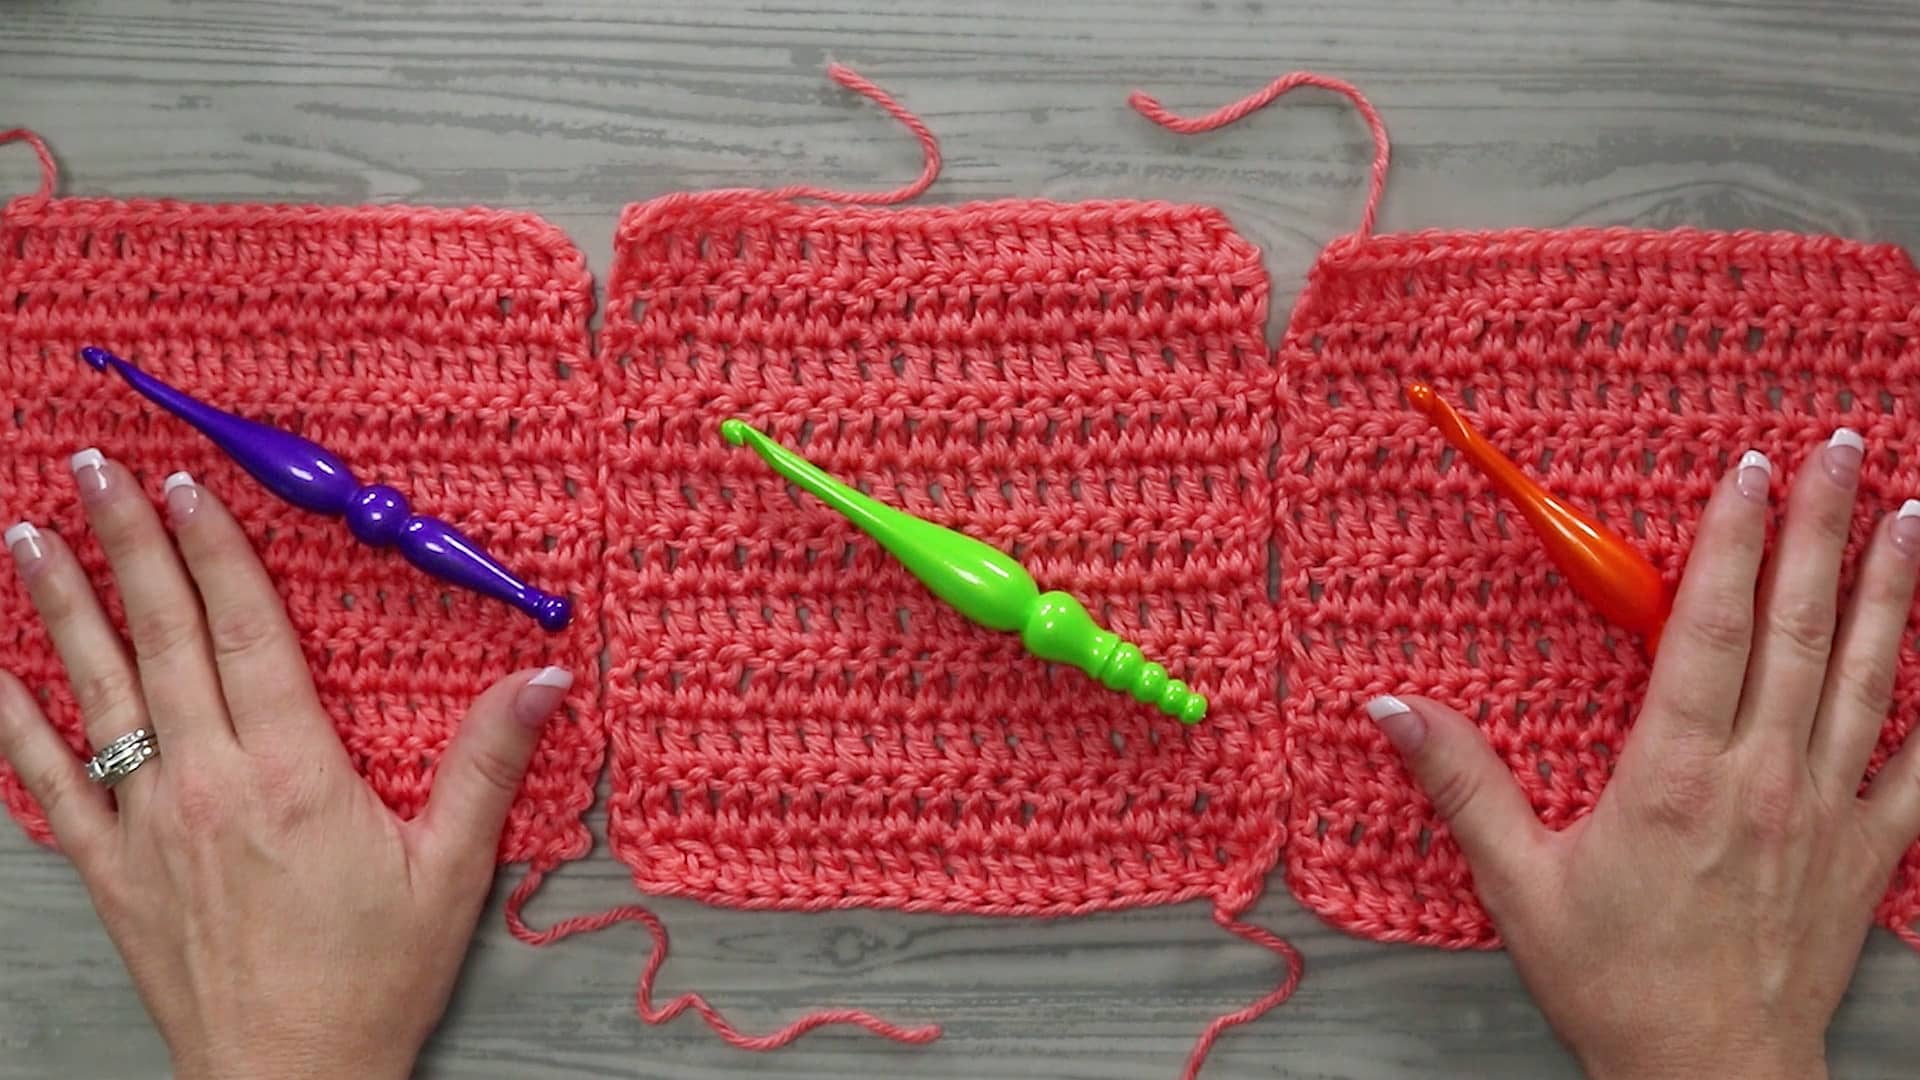 The Ultimate Guide to Yarn Weights and Crochet Hook Sizes